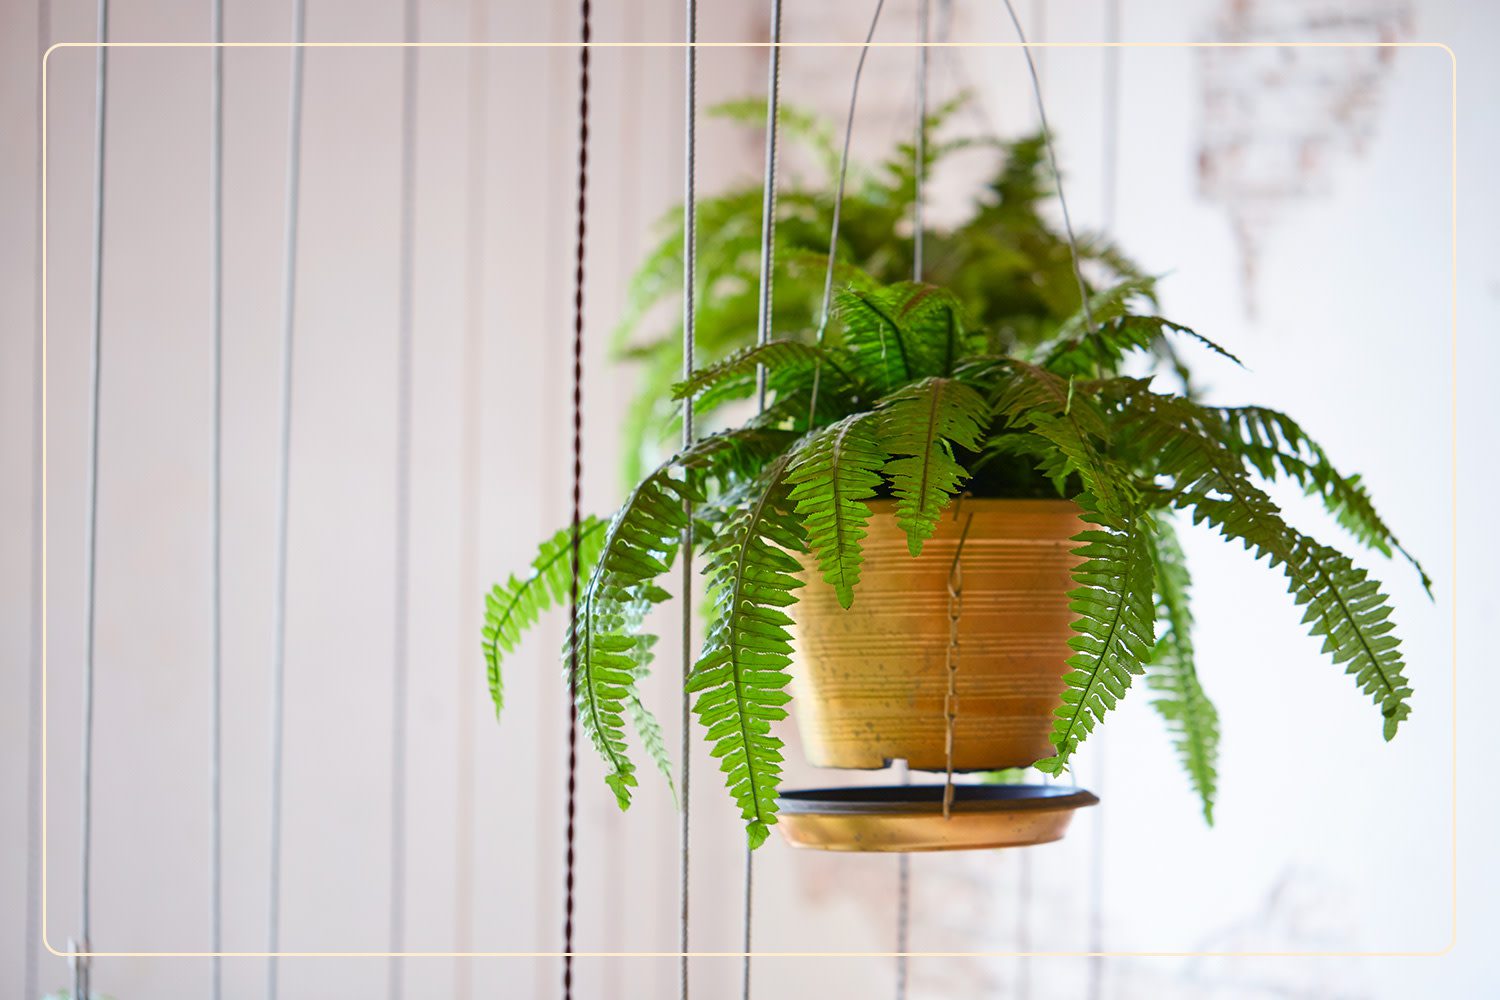 Boston Fern (Nephrolepis exaltata), which is a pet-safe plant, hangs indoors in a cream-colored planter